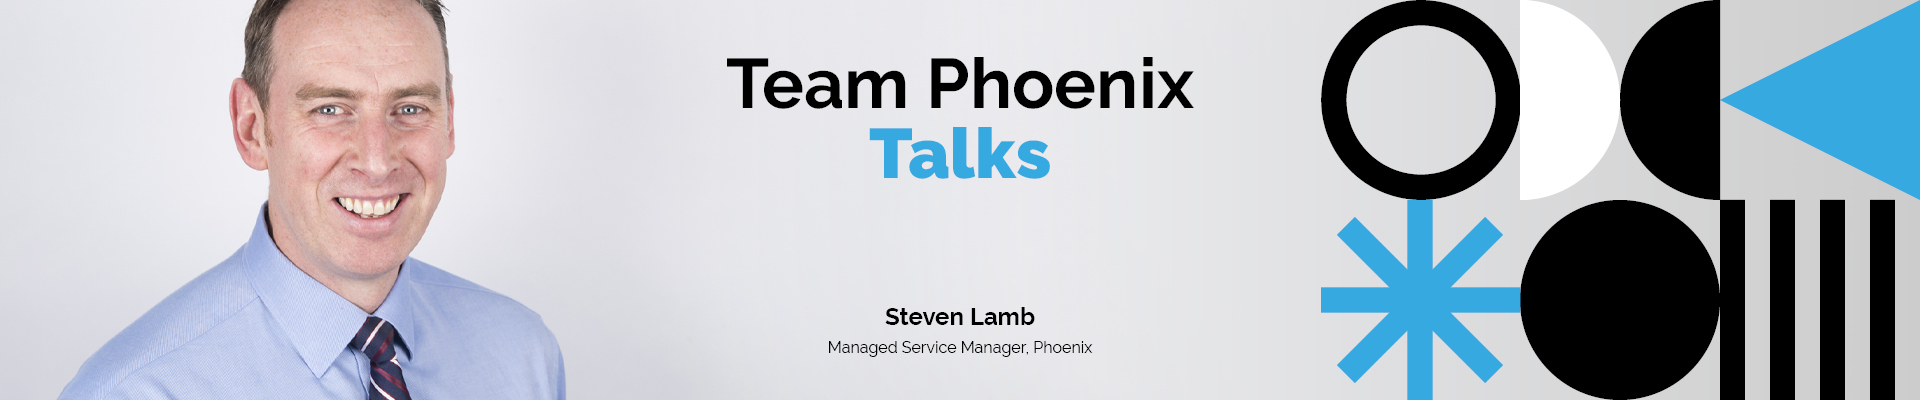 Team Phoenix Talks: Armed Forces Day